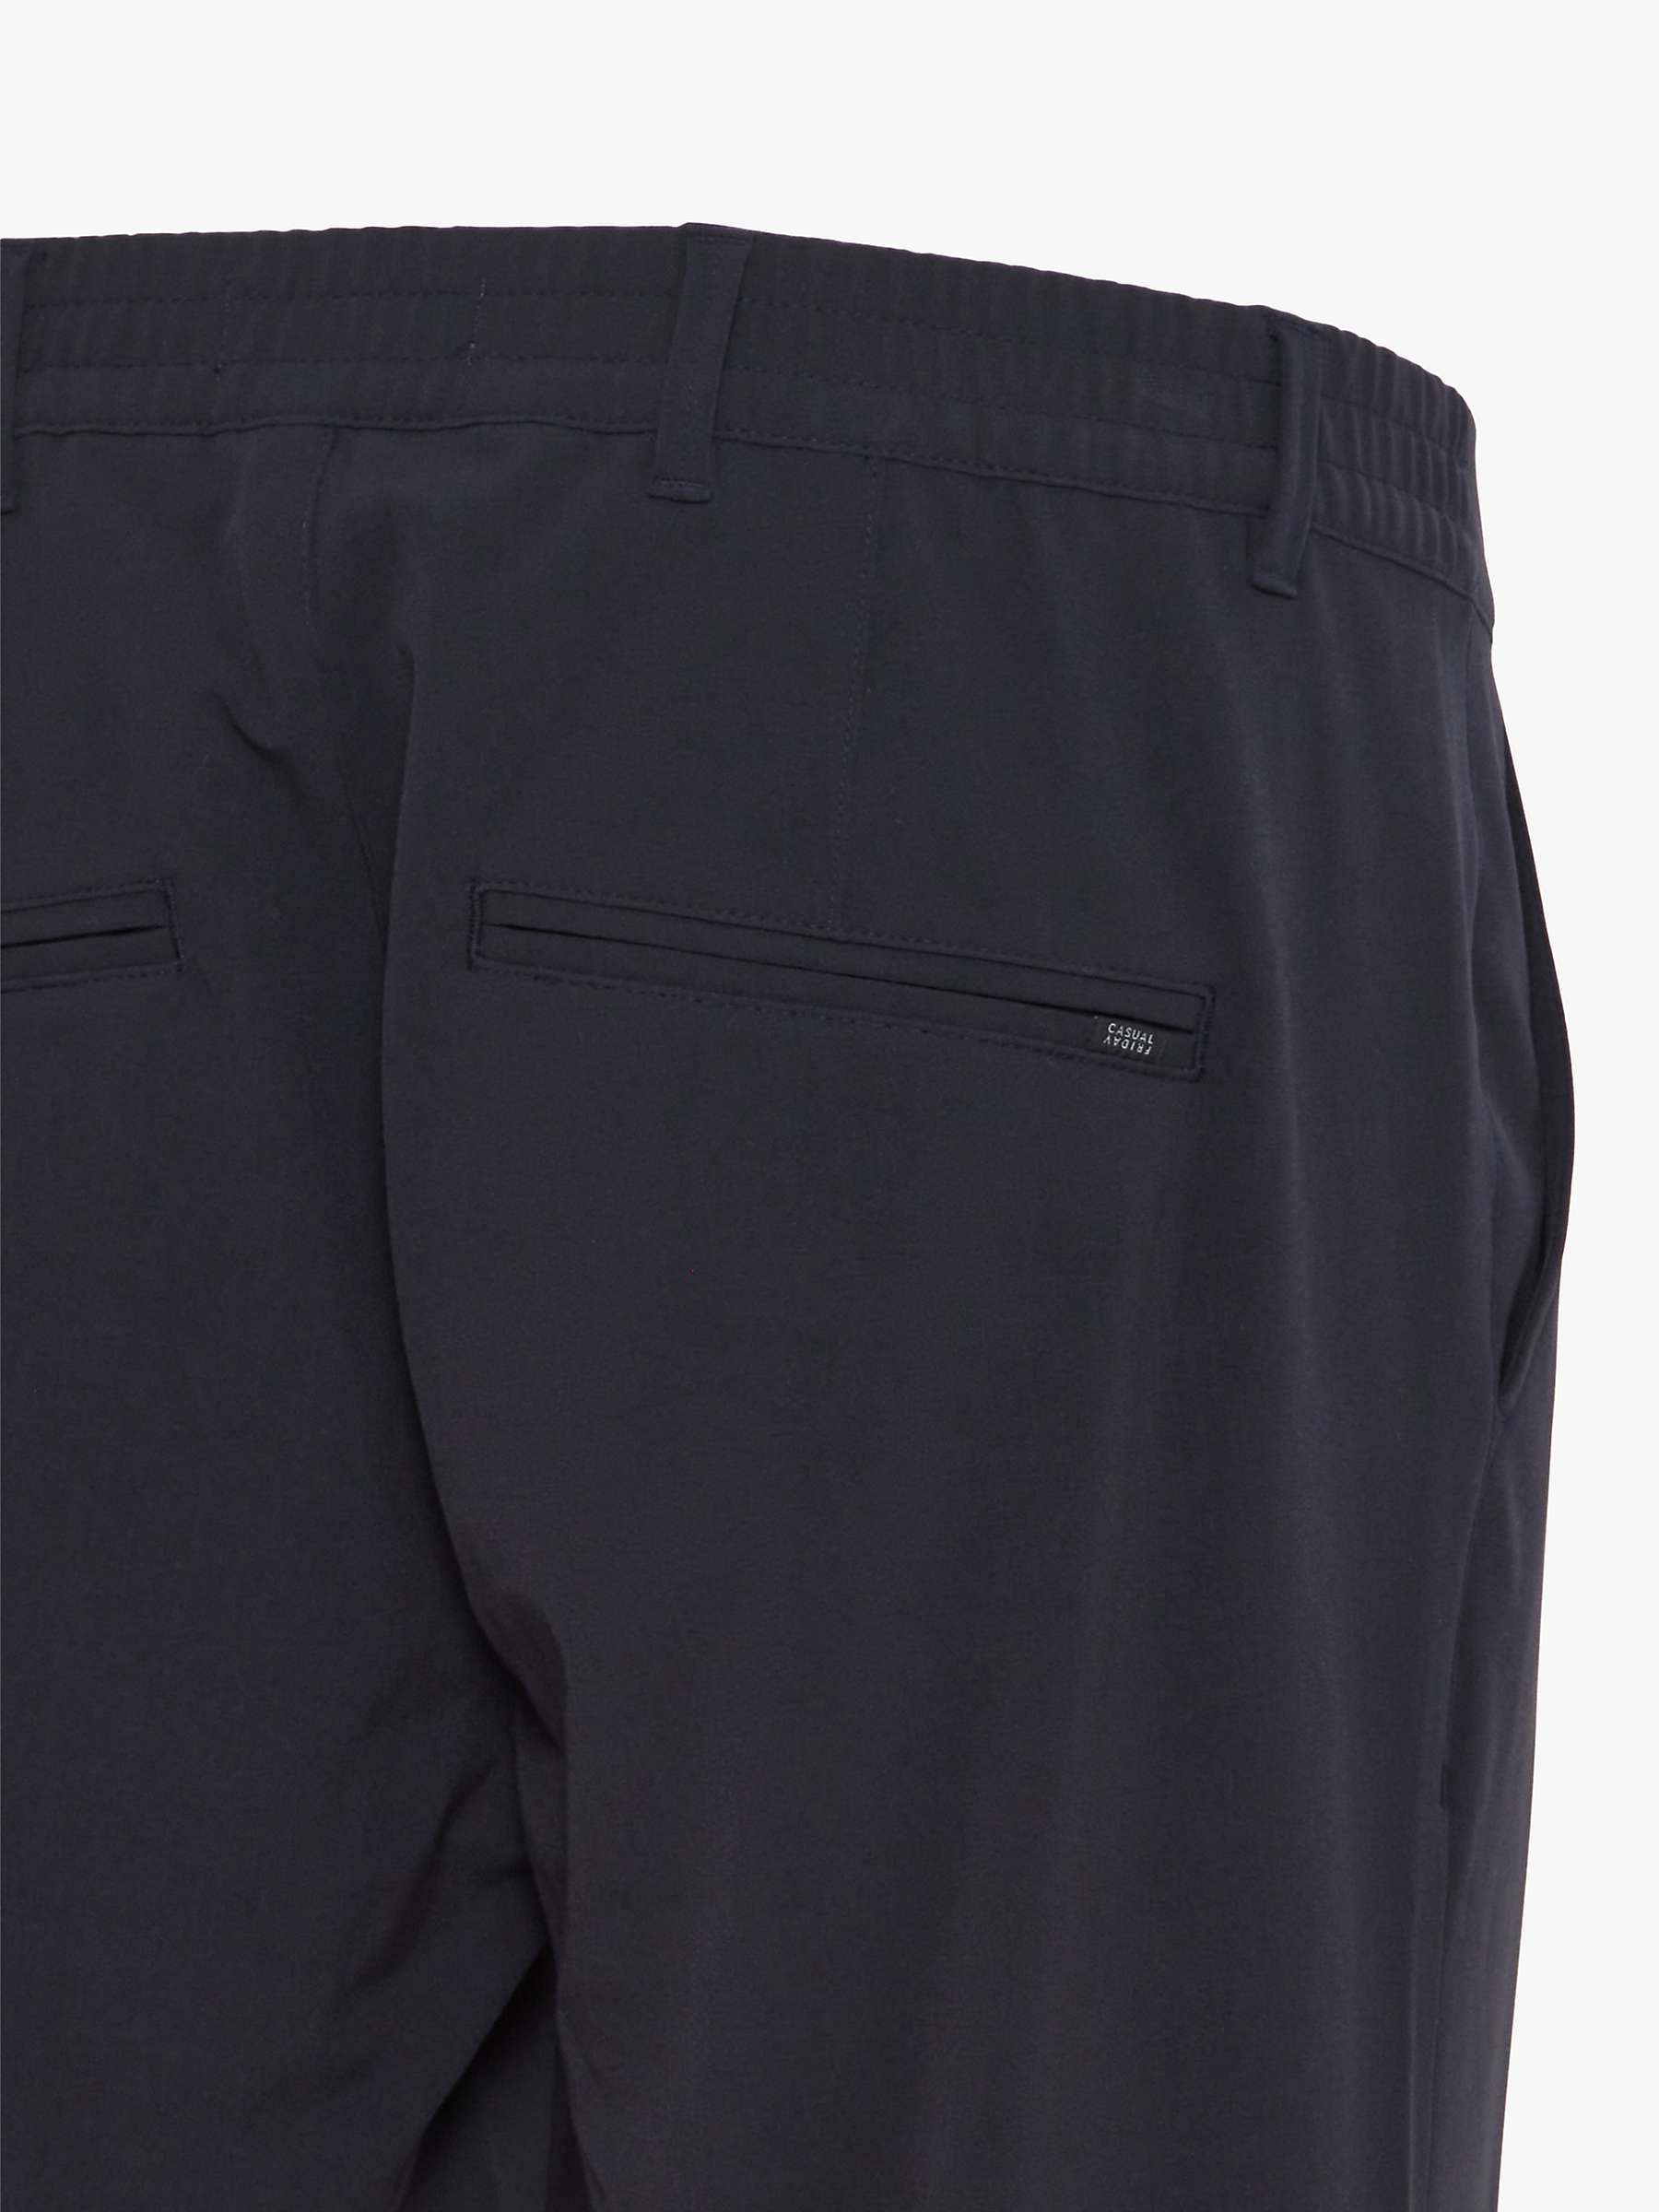 Buy Casual Friday Pandrup Regular Fit Stretch Trousers Online at johnlewis.com